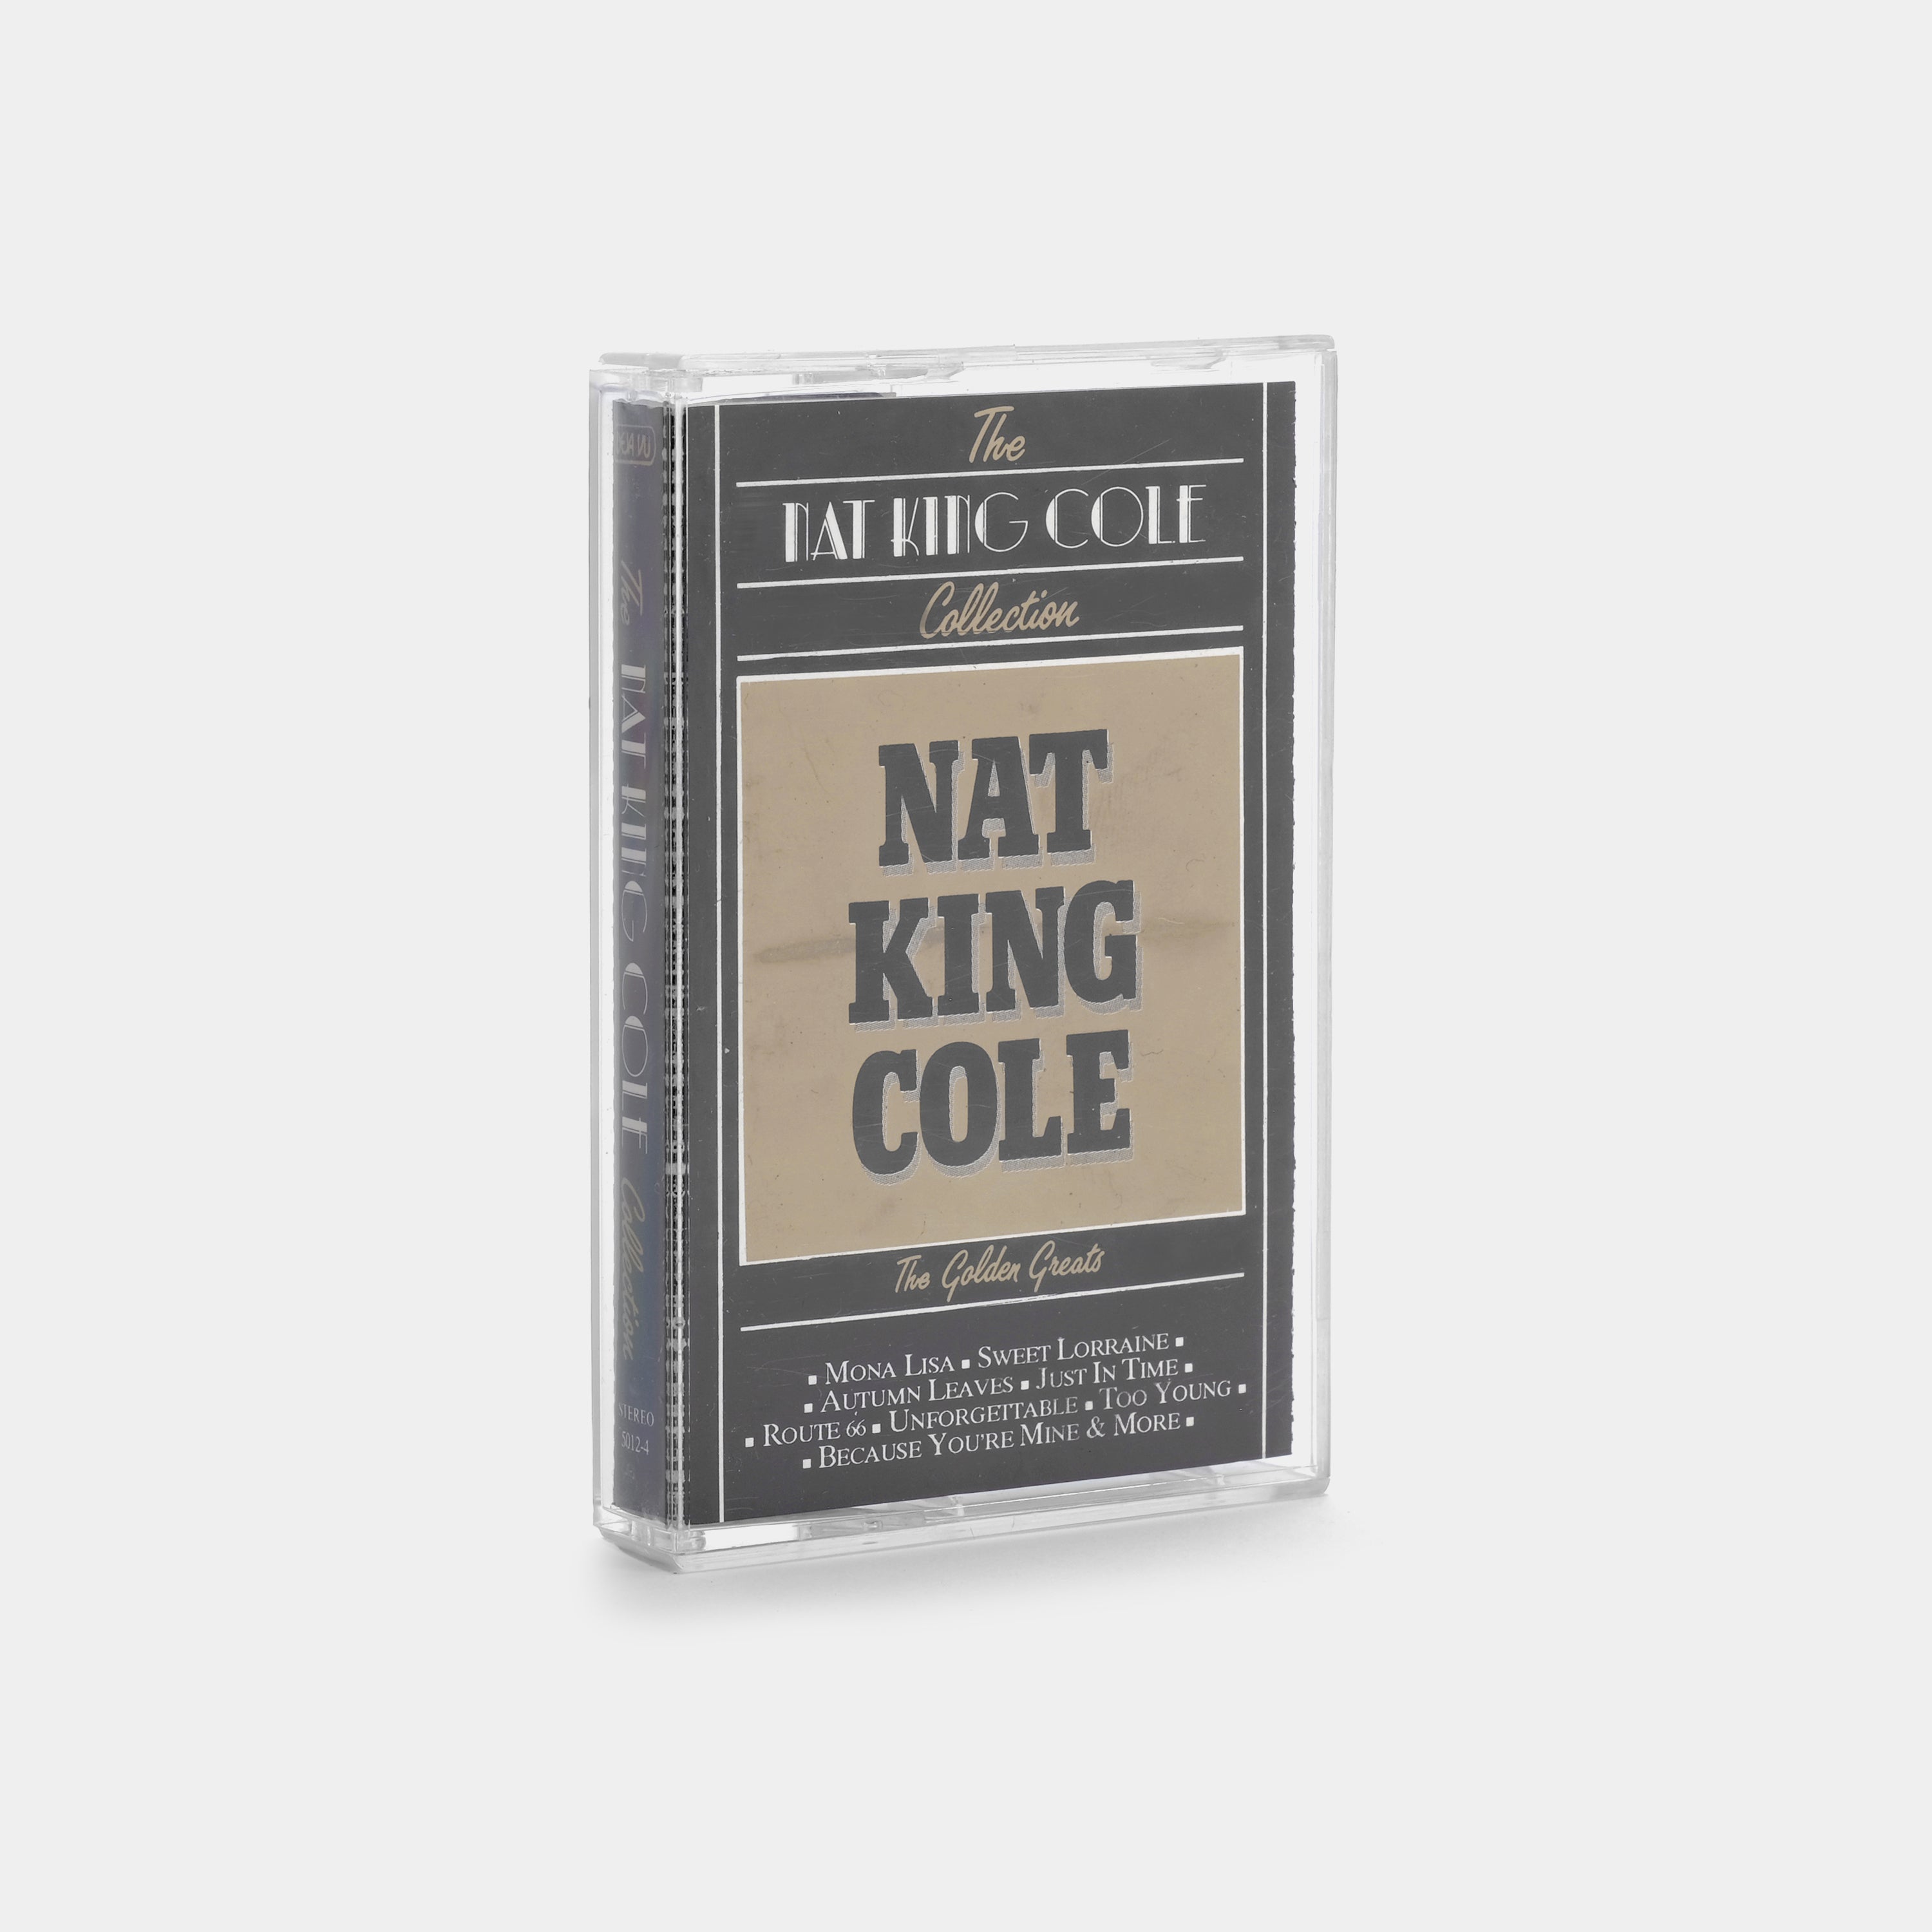 Nat King Cole - The Nat King Cole Collection - The Golden Greats Cassette Tape